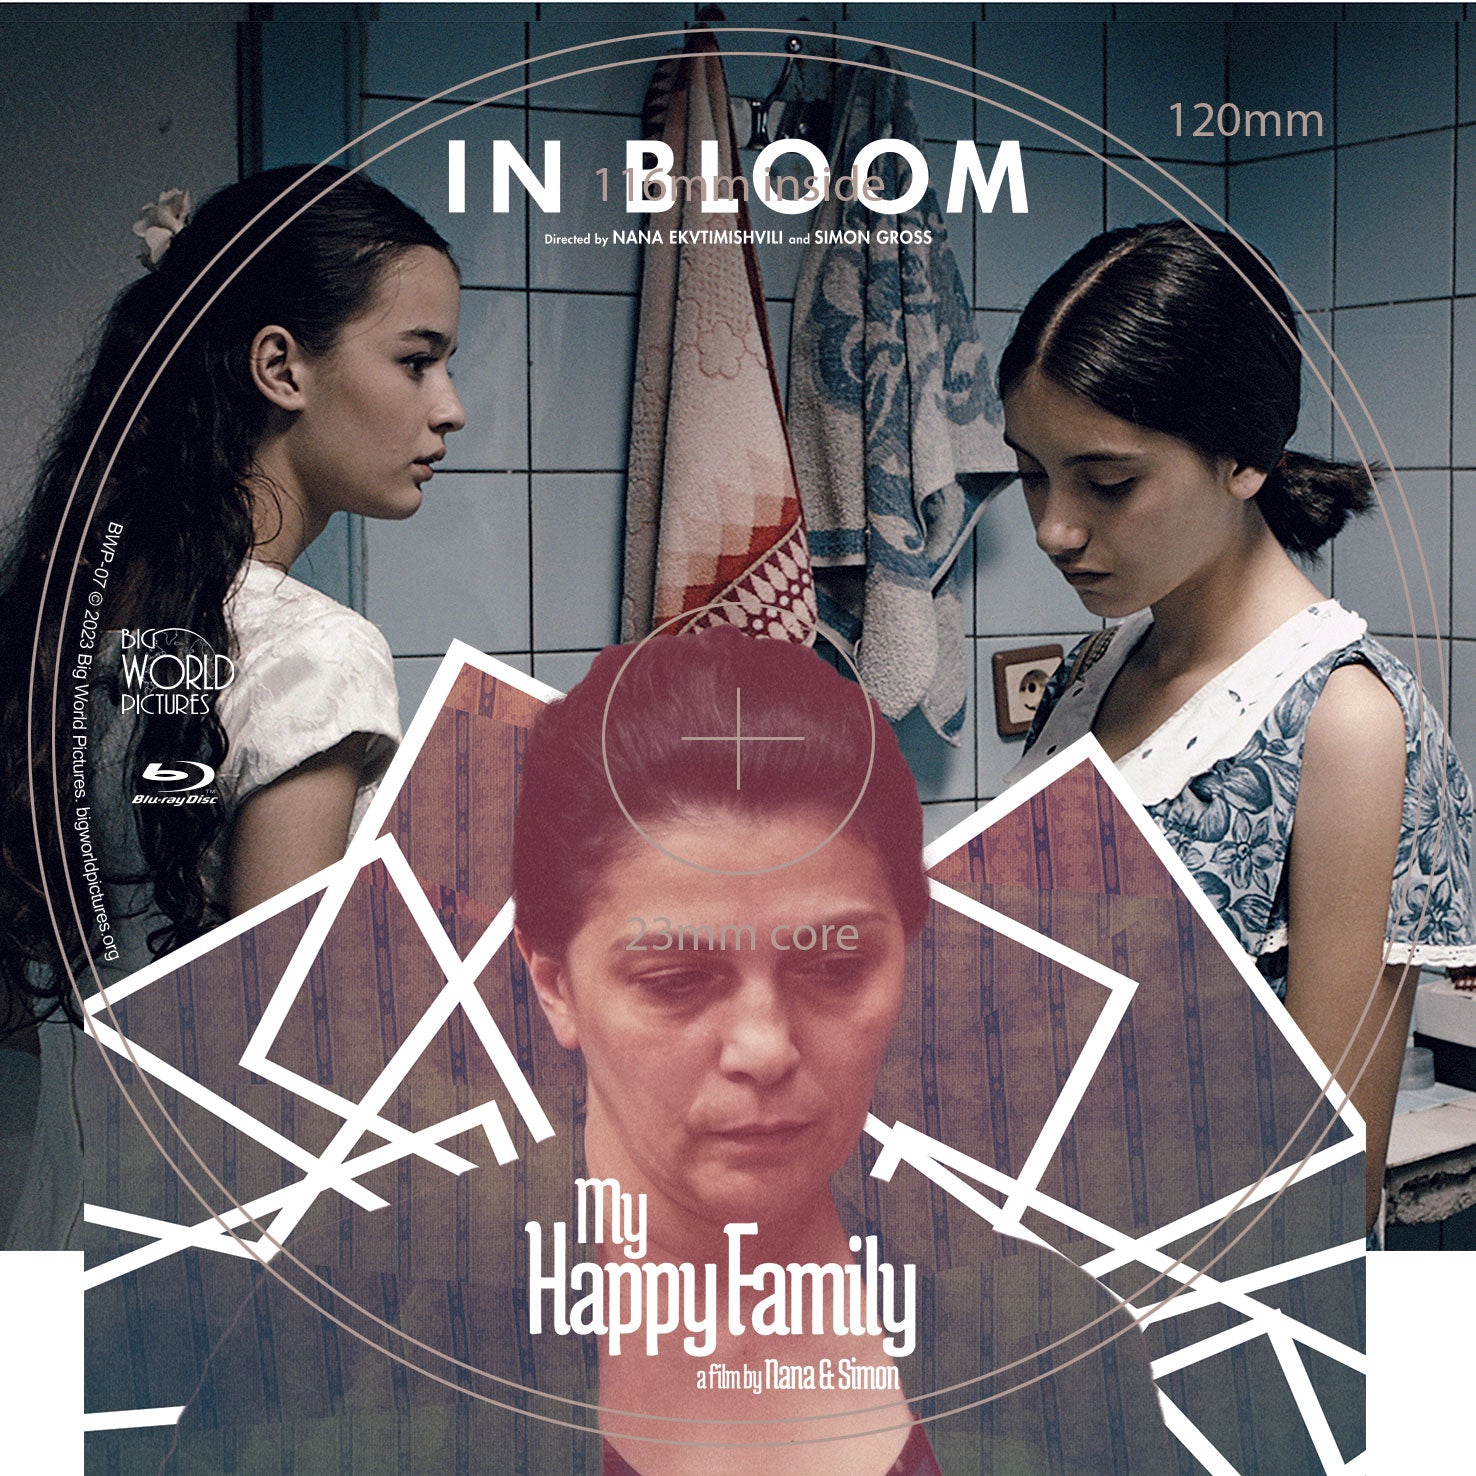 IN BLOOM / MY HAPPY FAMILY (LIMITED EDITION) BLU-RAY